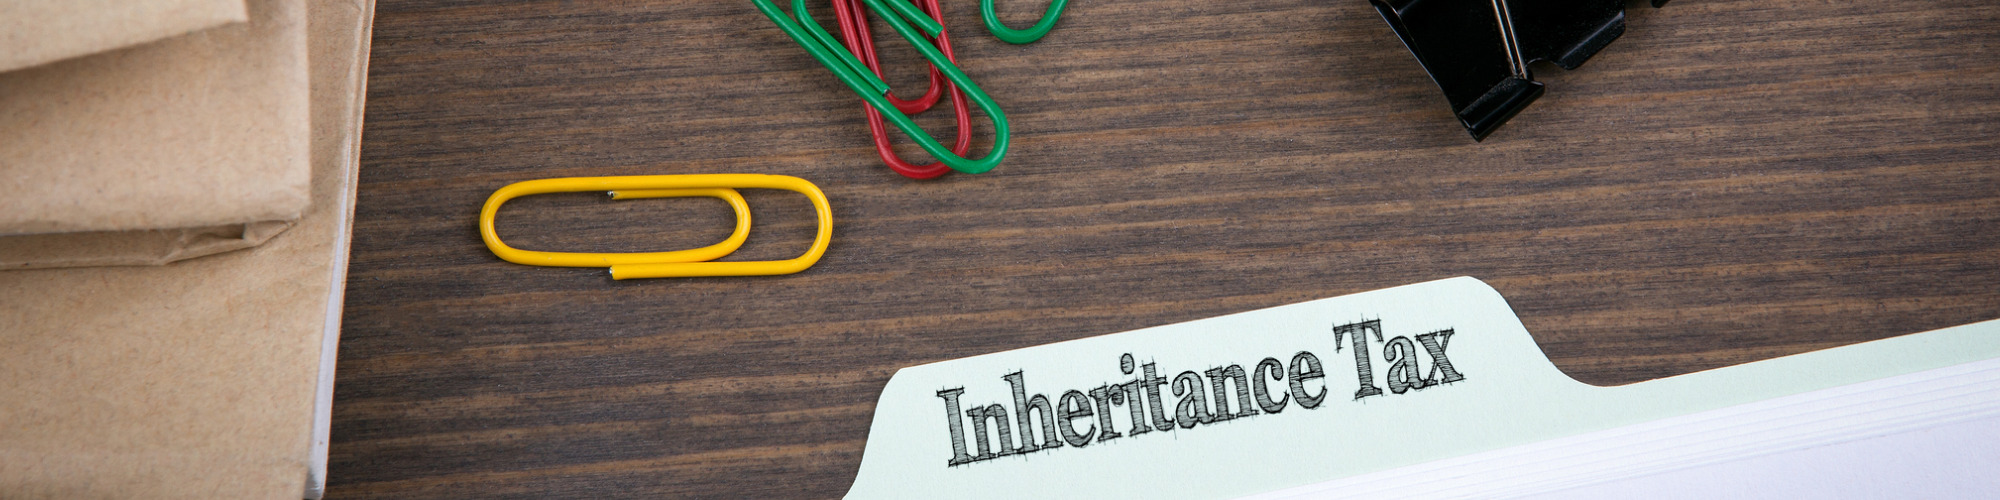 The Inheritance Tax Rules - An Introduction for Probate Practitioners